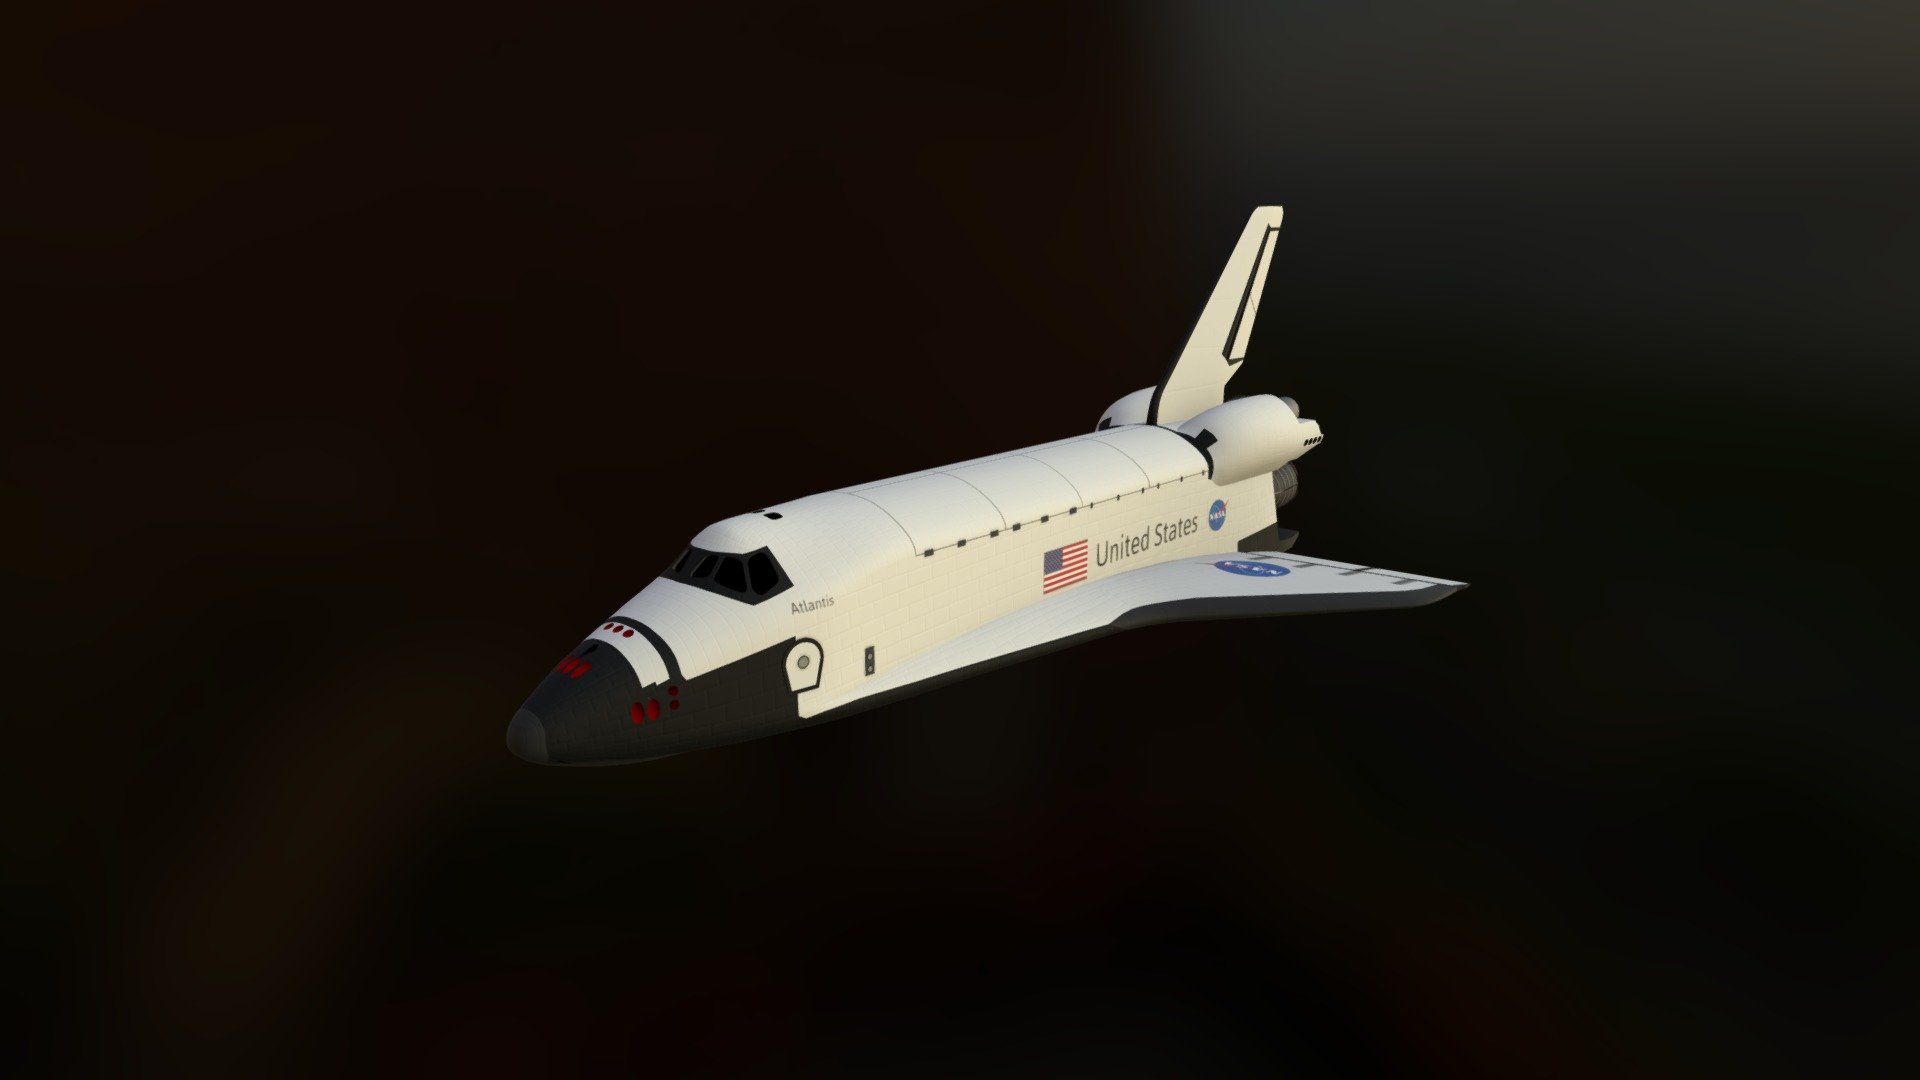 The Space Shuttle was a partially reusable low Earth orbital spacecraft system operated by the U.S. National Aeronautics and Space Administration (NASA), as part of the Space Shuttle program. Its official program name was Space Transportation System (STS), taken from a 1969 plan for a system of reusable spacecraft of which it was the only item funded for development.The first of four orbital test flights occurred in 1981, leading to operational flights beginning in 1982. Five complete Shuttle systems were built and used on a total of 135 missions from 1981 to 2011, launched from the Kennedy Space Center (KSC) in Florida. Operational missions launched numerous satellites, interplanetary probes, and the Hubble Space Telescope (HST); conducted science experiments in orbit; and participated in construction and servicing of the International Space Station. The Shuttle fleet's total mission time was 1322 days, 19 hours, 21 minutes and 23 seconds 3d model